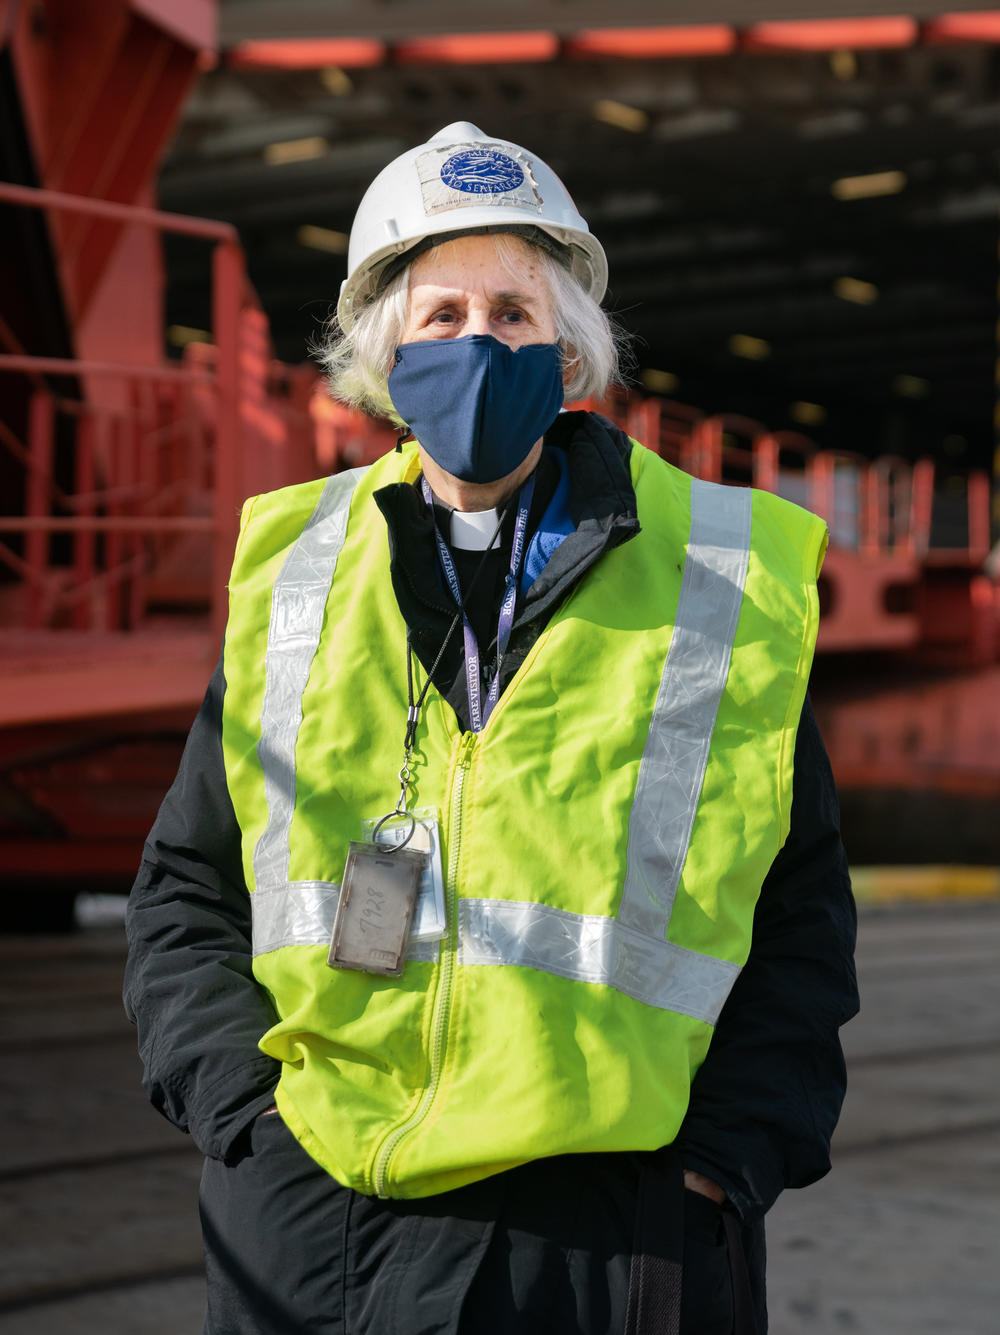 The Rev. Mary Davisson, executive director and port chaplain of the Baltimore International Seafarers' Center, delivers personal items to seafarers who are not allowed off ships.